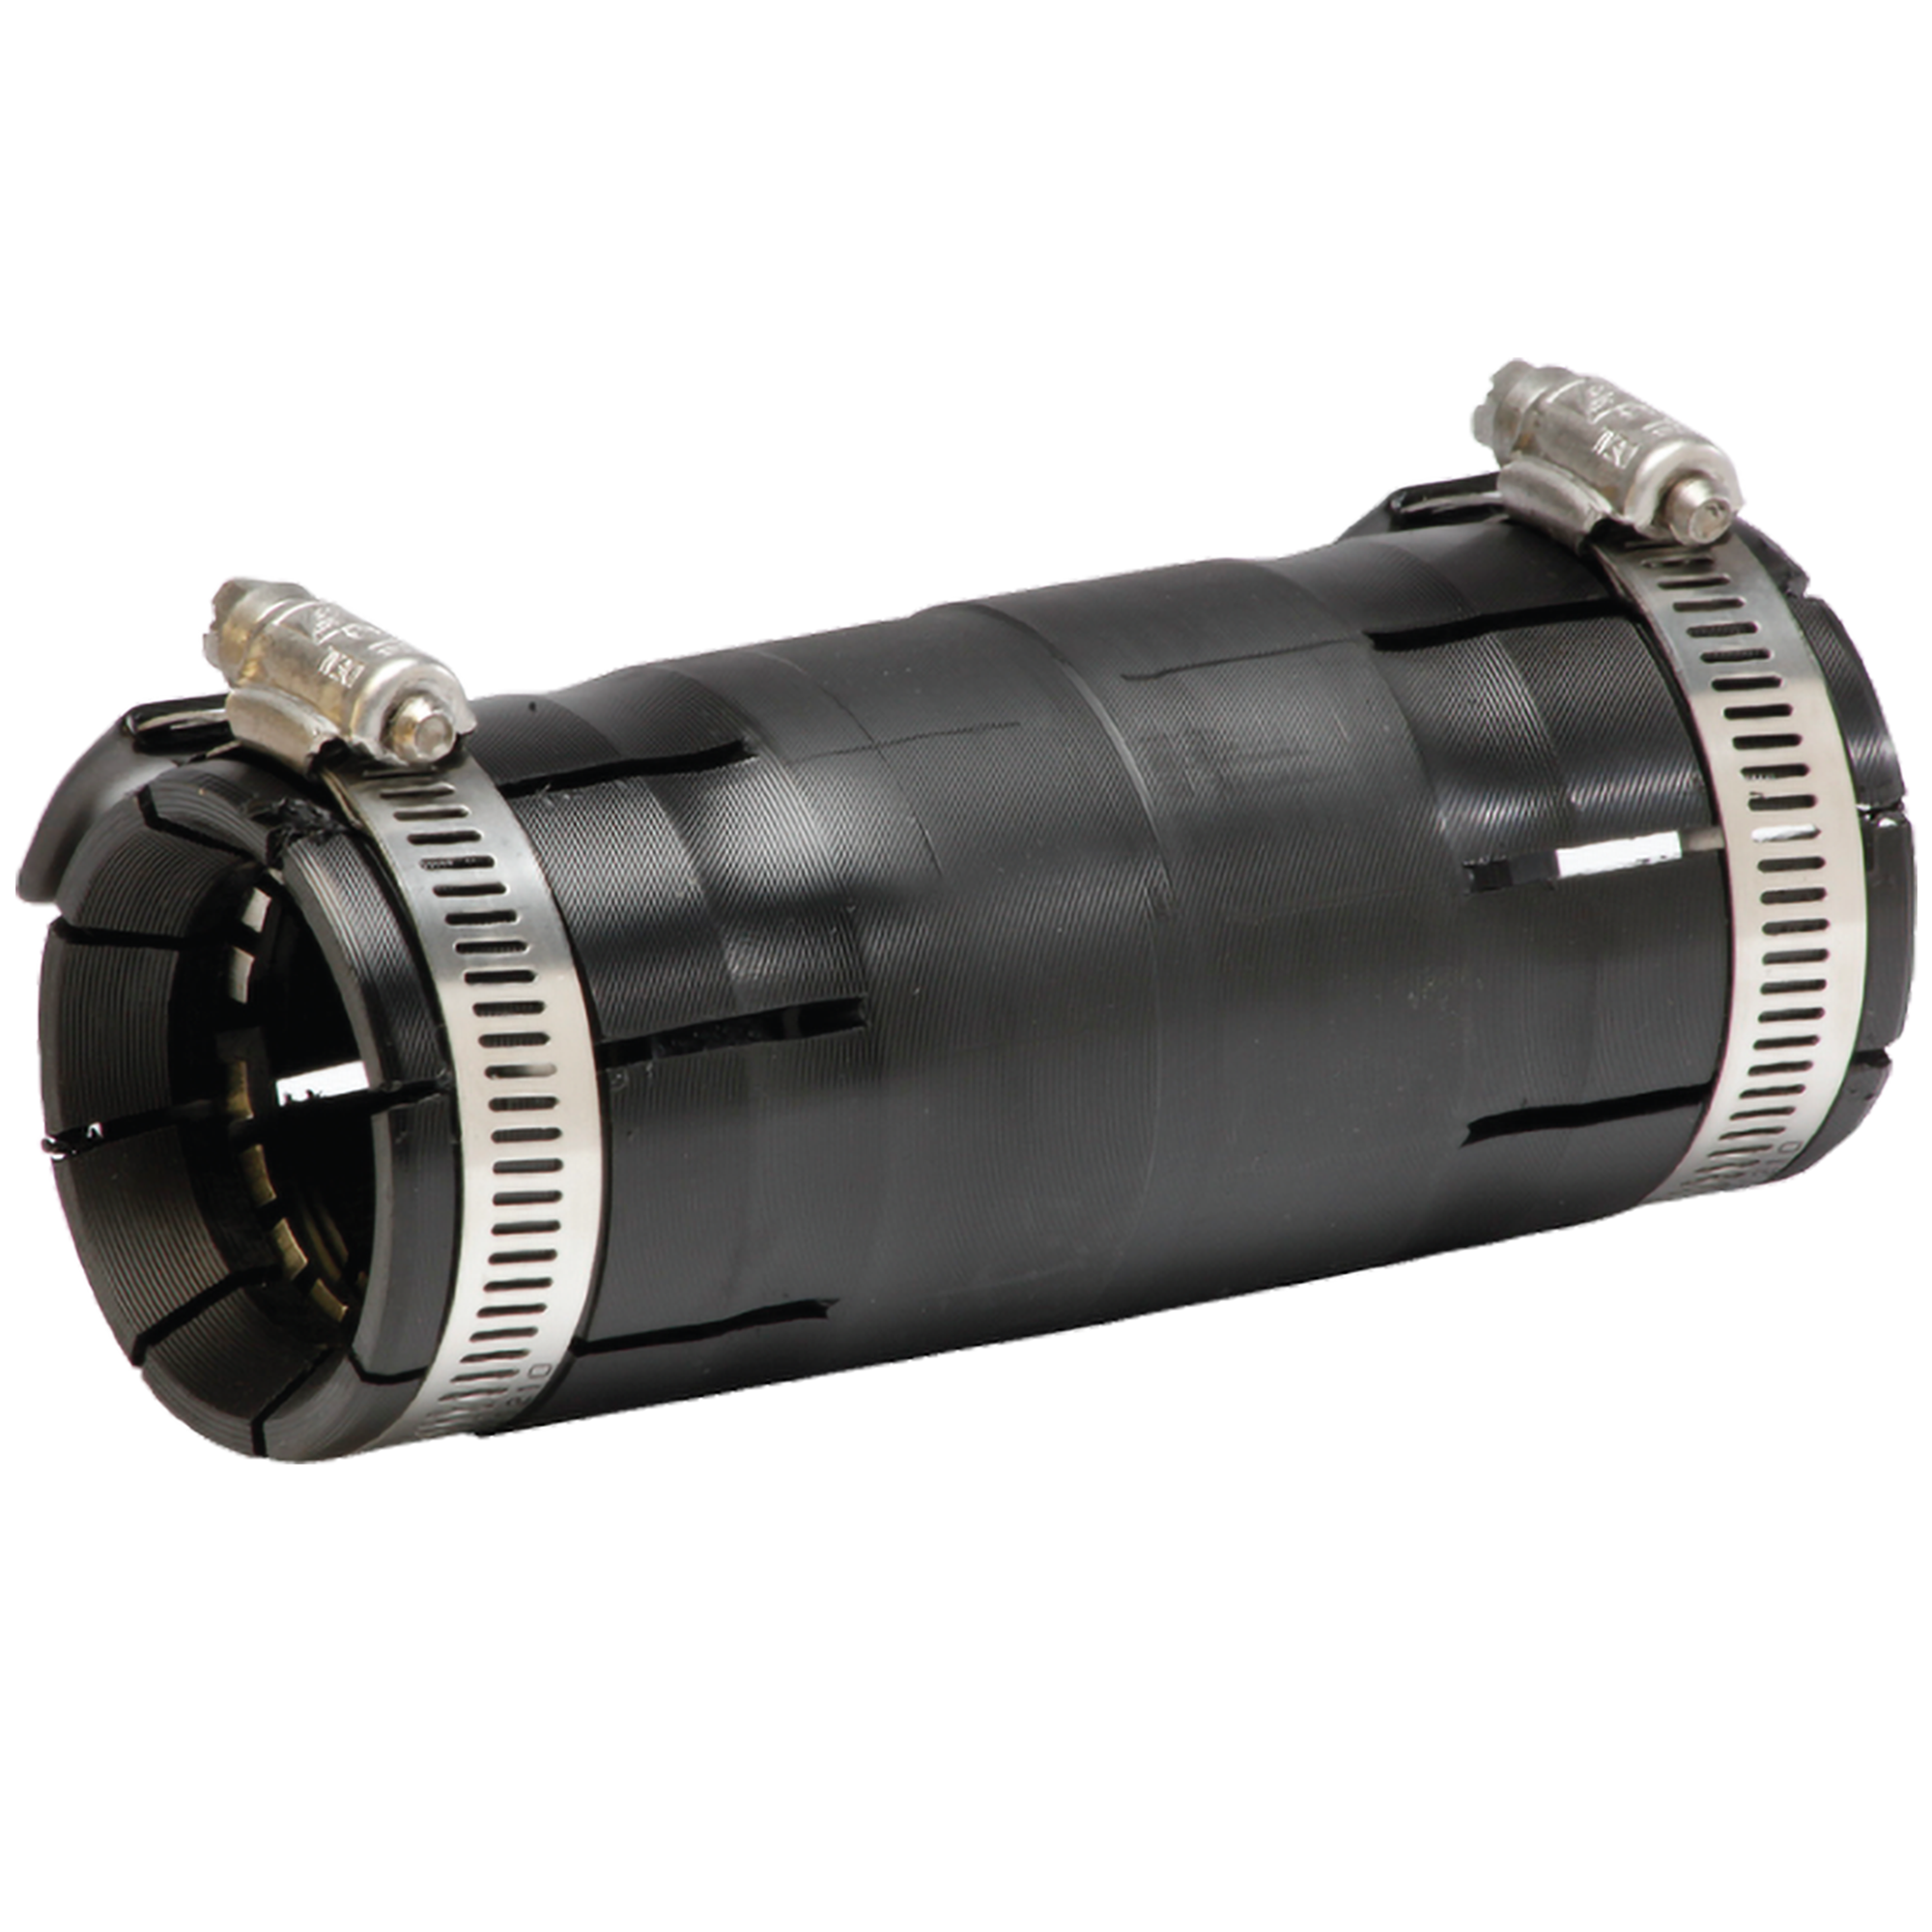 Shur-Lock II is a plastic coupler designed for coupling HDPE & PVC conduit. Can also be used to couple dissimilar conduits such as HDPE to PVC, threaded or non-threaded metal conduit, or fiberglass (FRP) conduit. The coupler features stainless steel band clamps (hand tightened using a 5/16" nut driver) and locking ring. A pre-lubricated O-ring forms an air-tight seal to withstand 125 PSI on 1" - 3" sizes. Also a specialized coupler for use by electrical installers requiring ETL/UL listing. Spreader Tools are available for sizes 3", 4", and 6" to aid in the installation process.